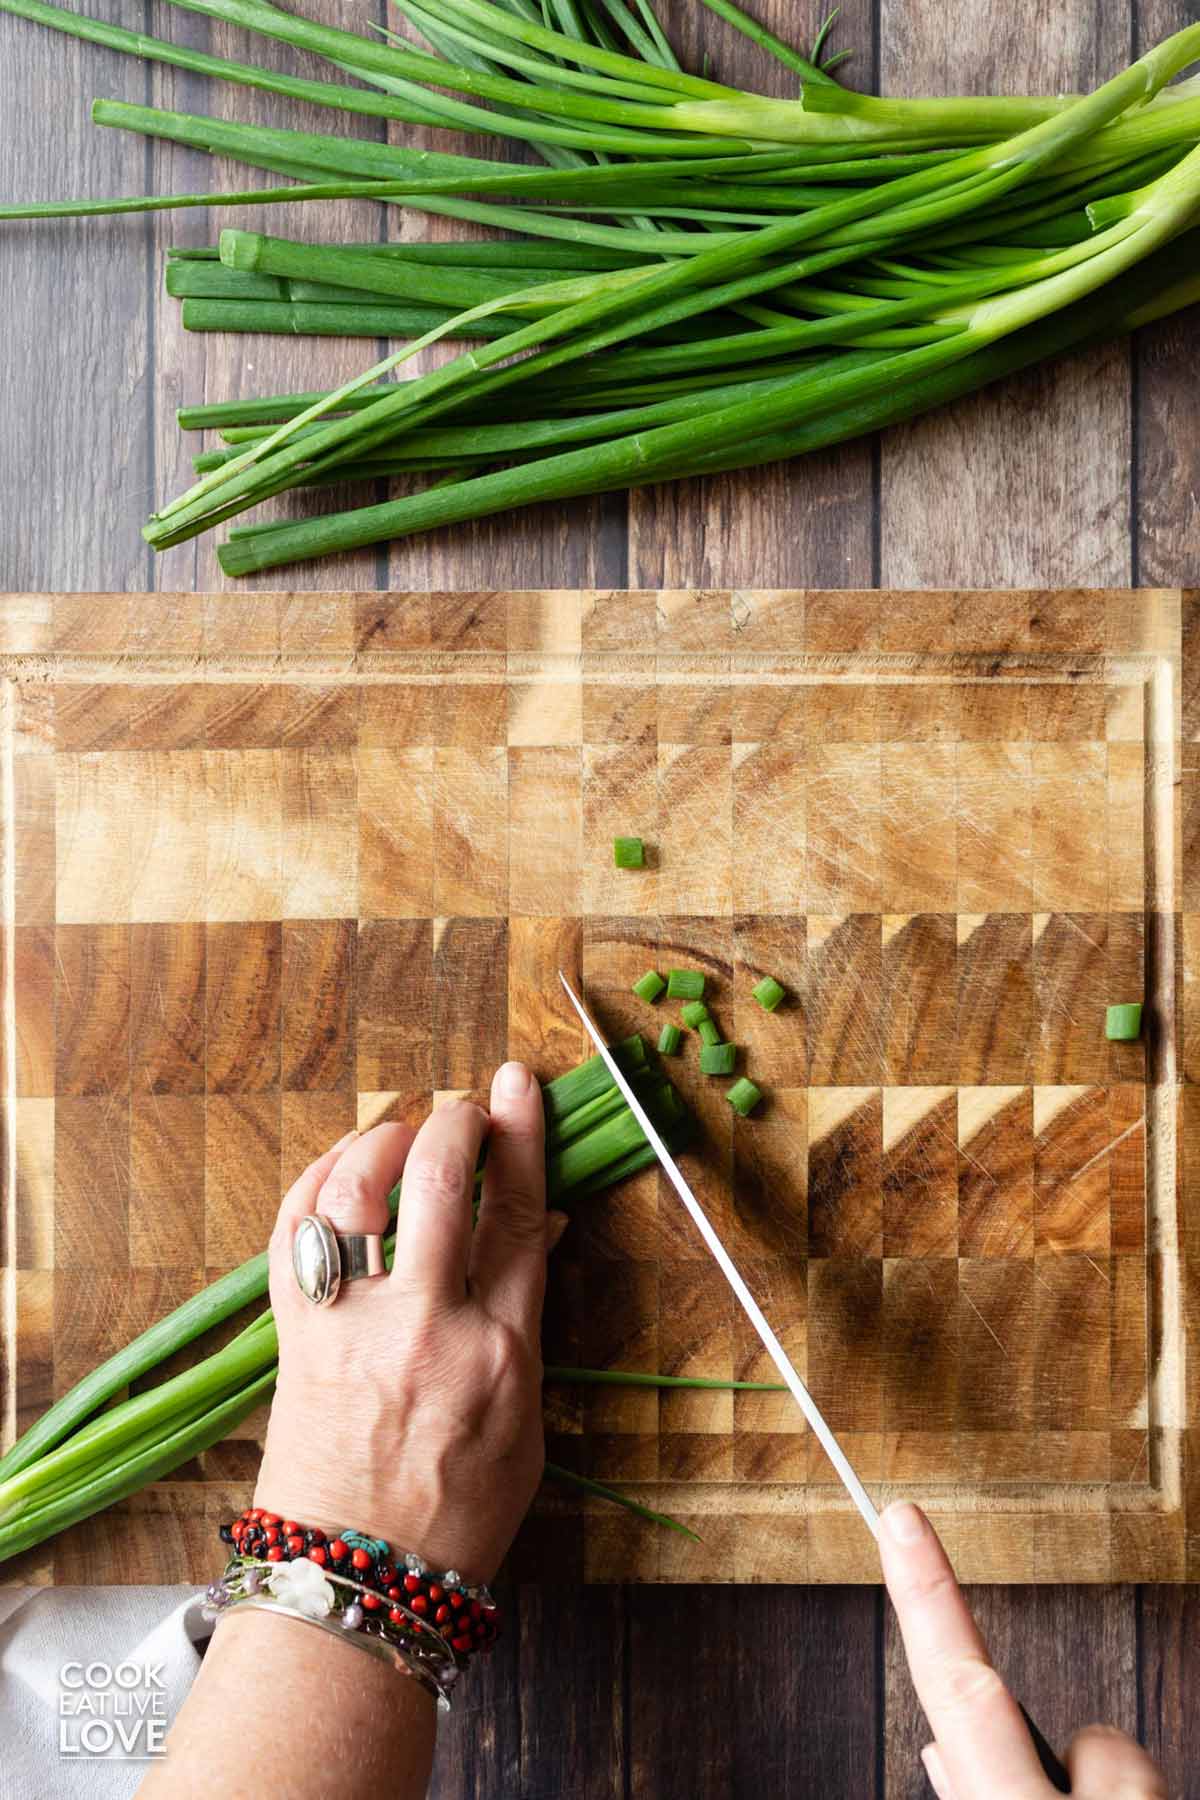 A hand holding the green onions and cutting into small straight pieces.